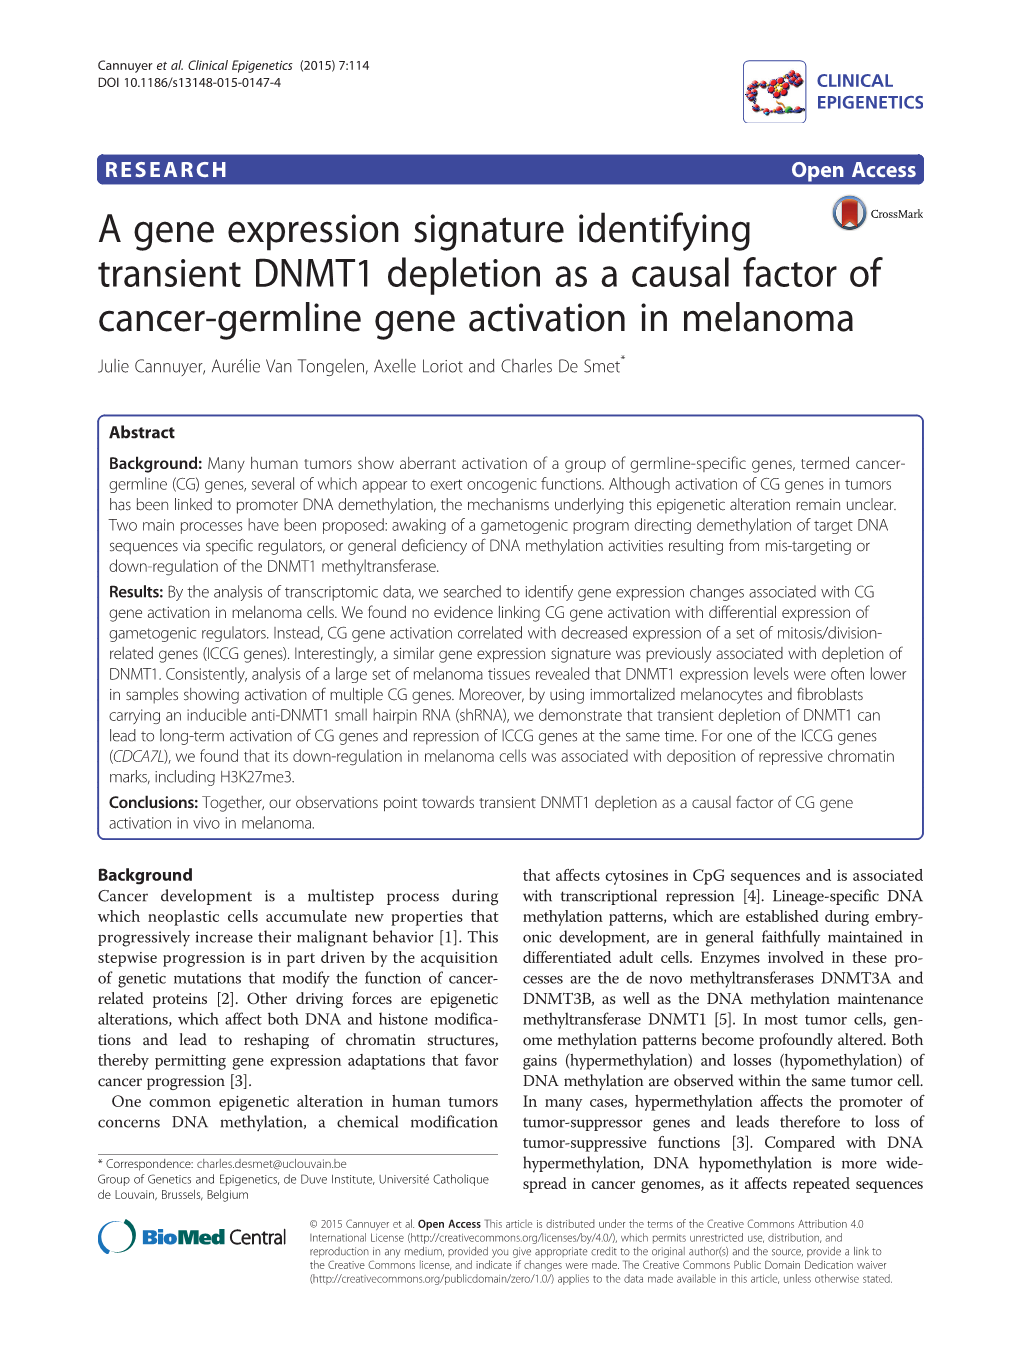 A Gene Expression Signature Identifying Transient DNMT1